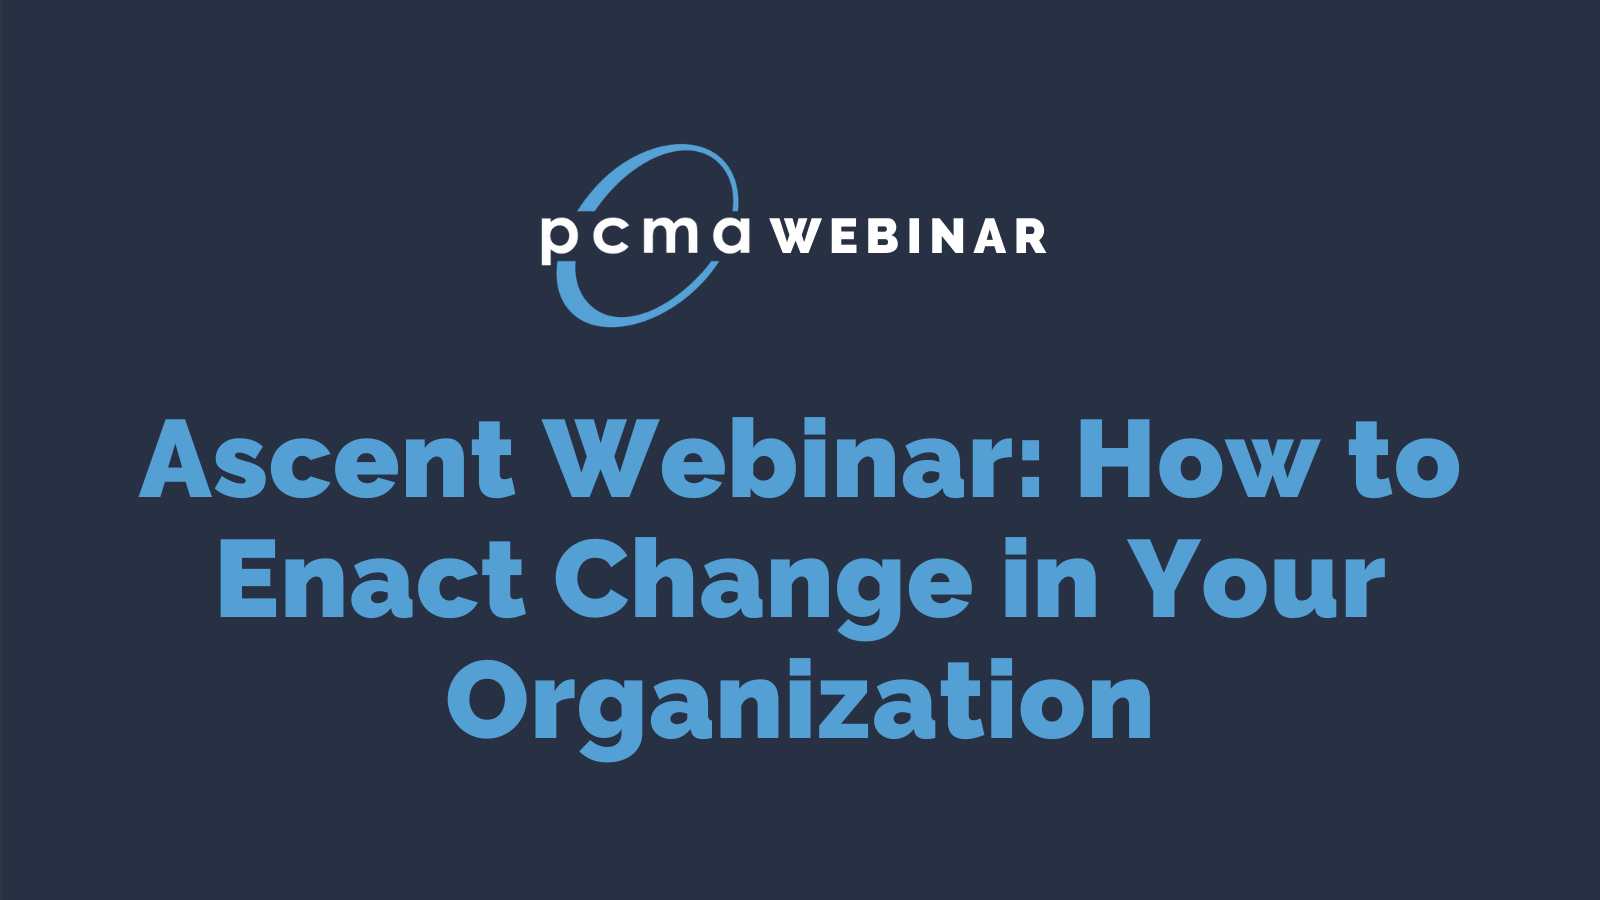 Ascent Webinar: How to Enact Change in Your Organization